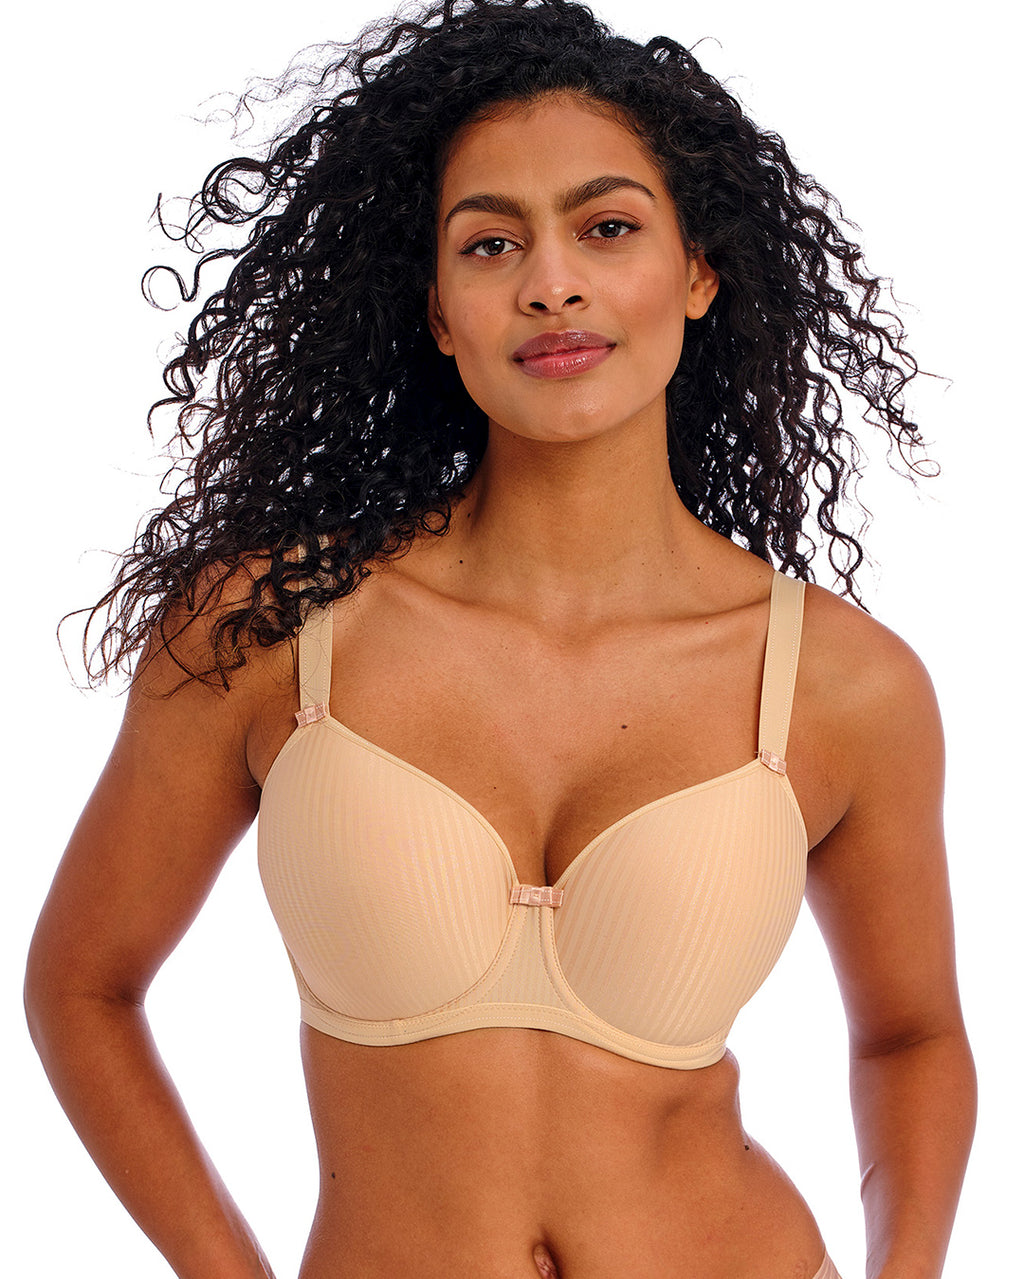 Tailored Natural Beige Moulded Strapless Bra from Freya